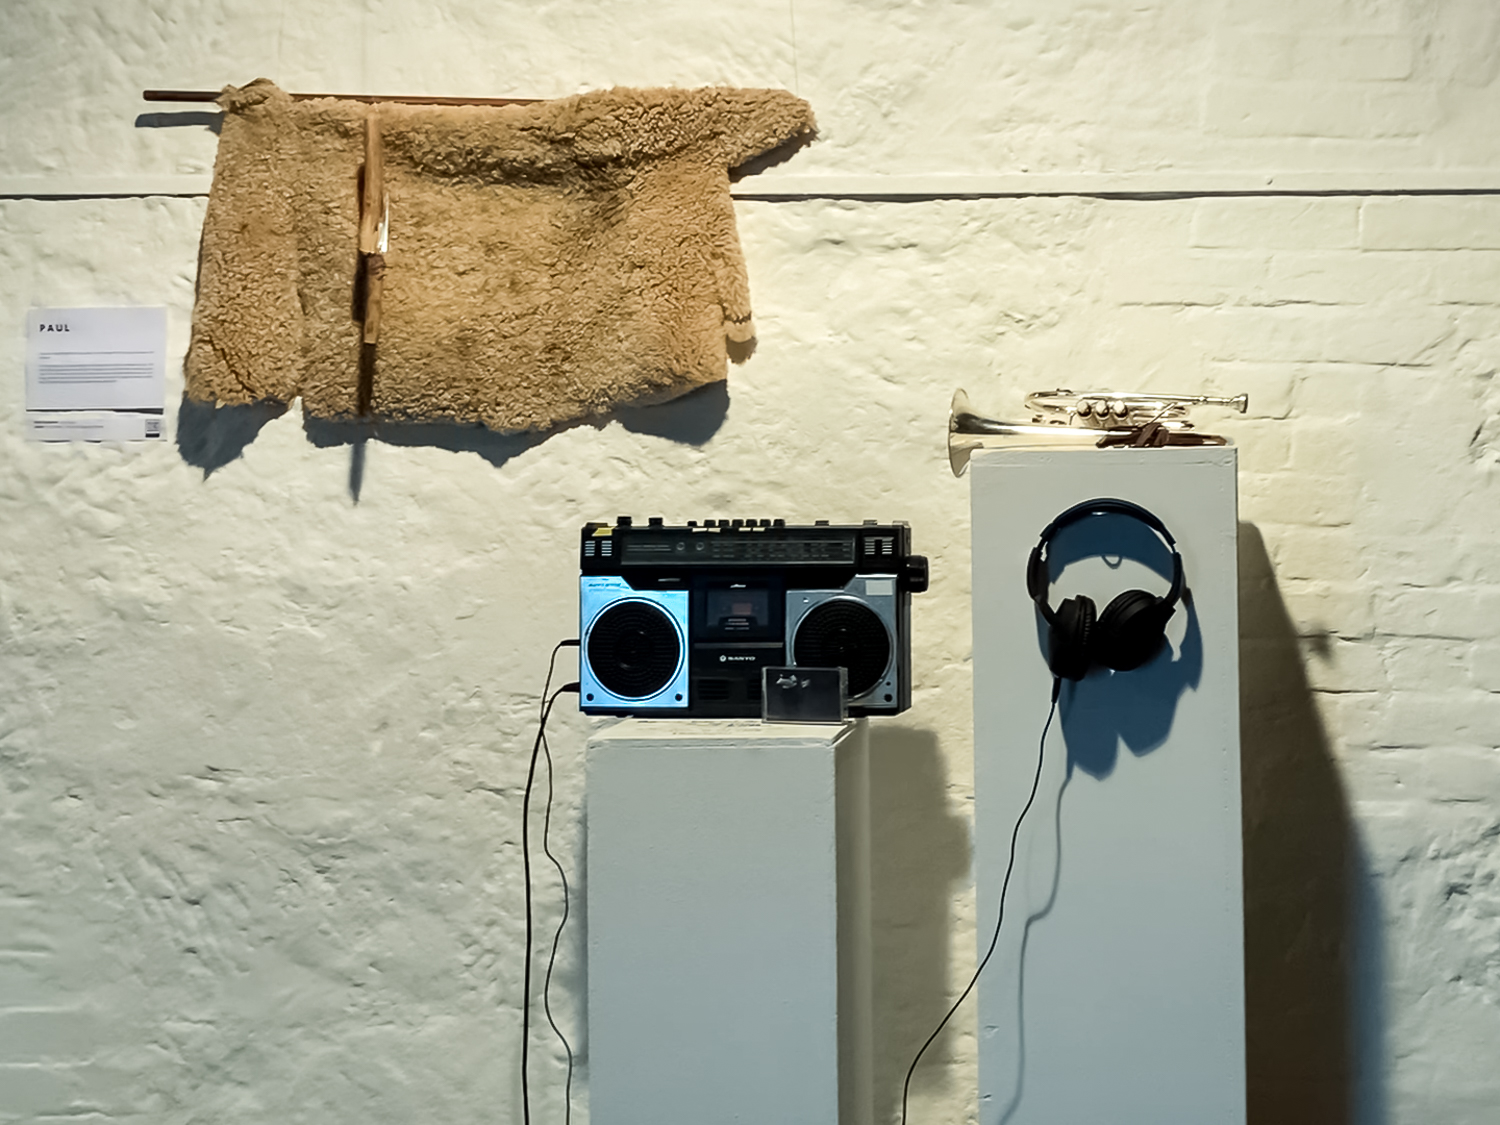 A white wall. A sheepskin with a knife hanging in front of if. Two plinths: one with a cassette player, the other with a brass instrument and some headphones